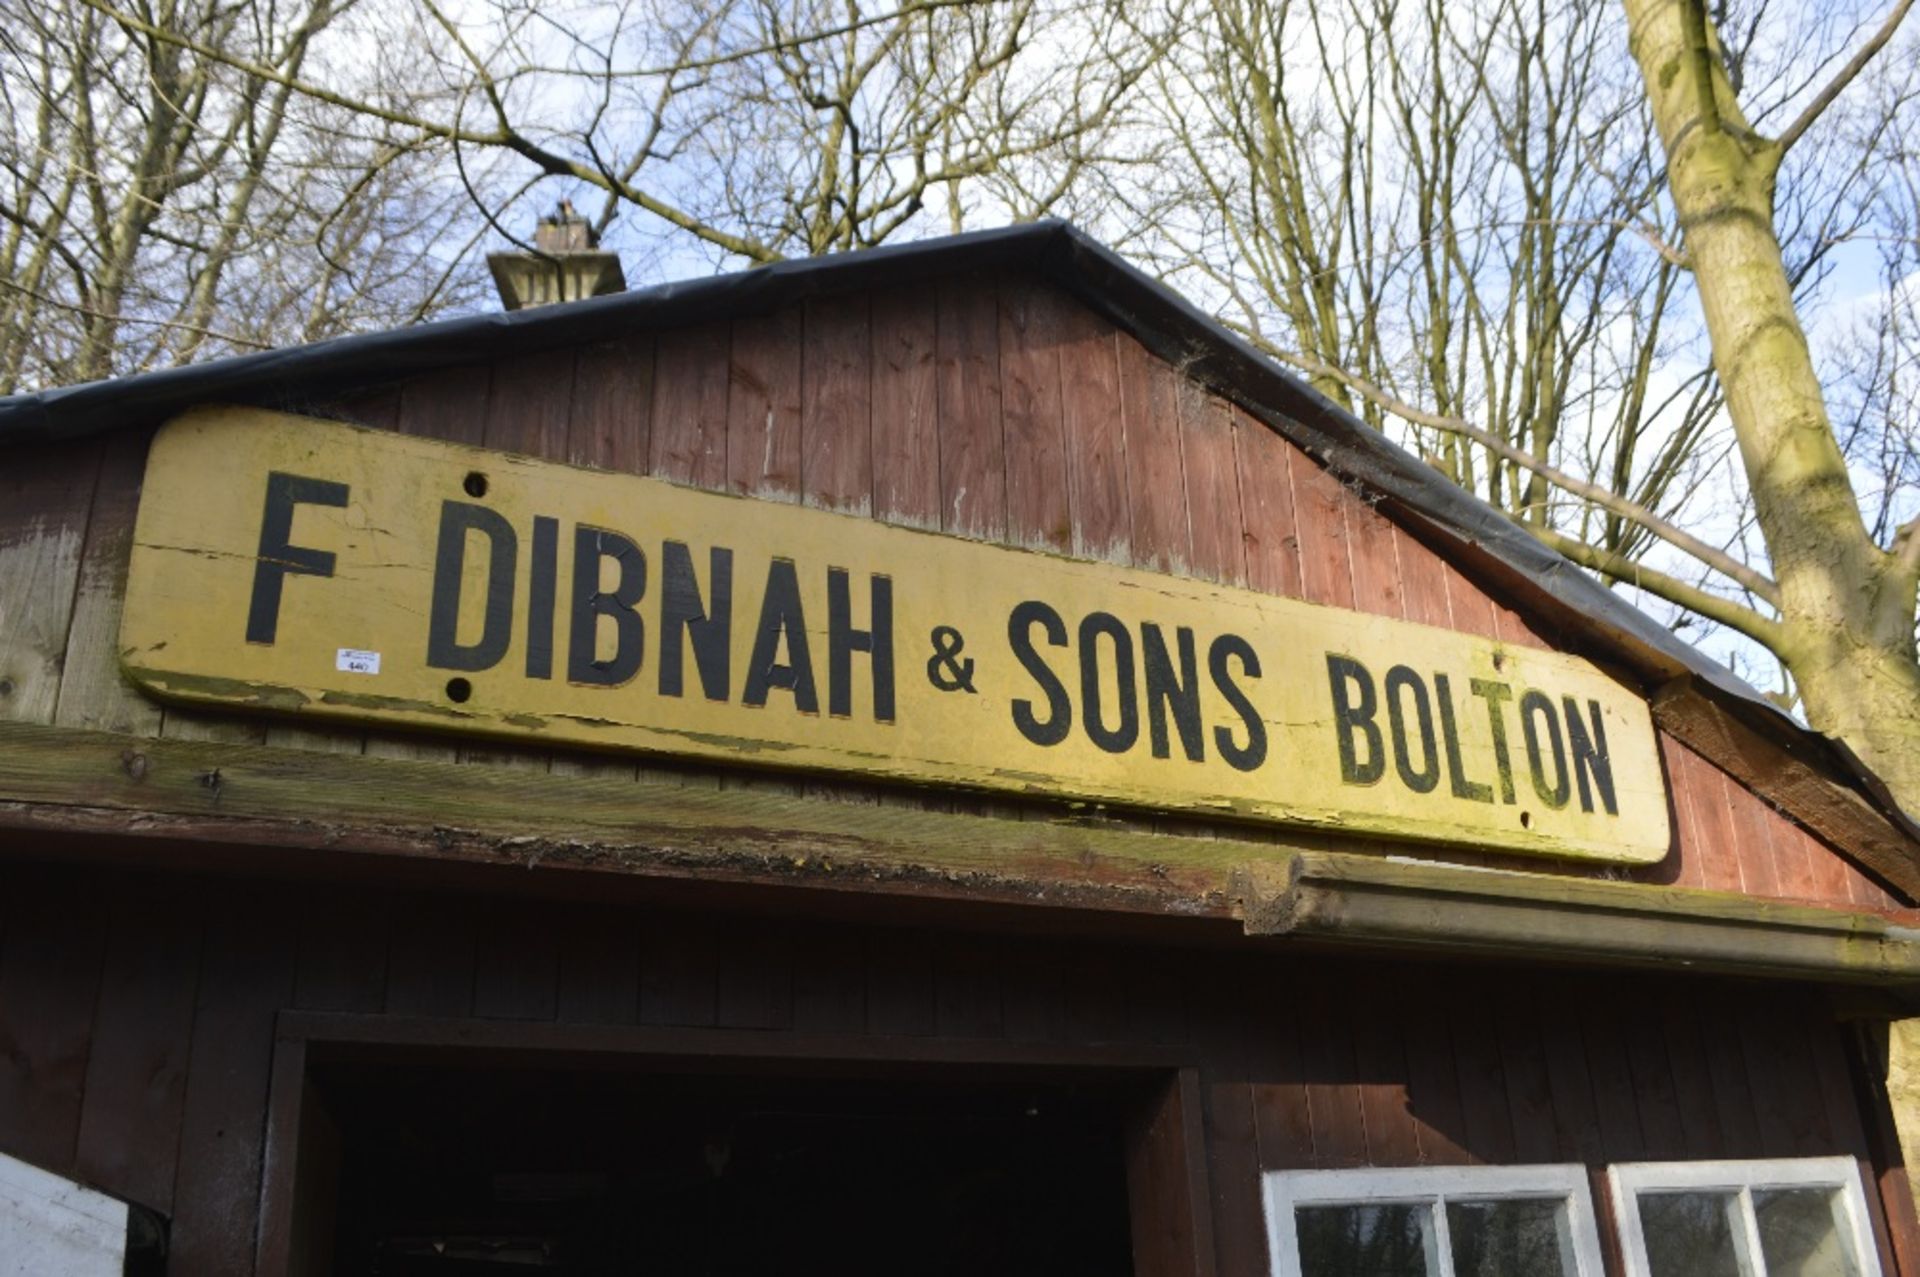 A wooden sign inscribed 'F Dibnah & Sons Bolton', width approx. 79".